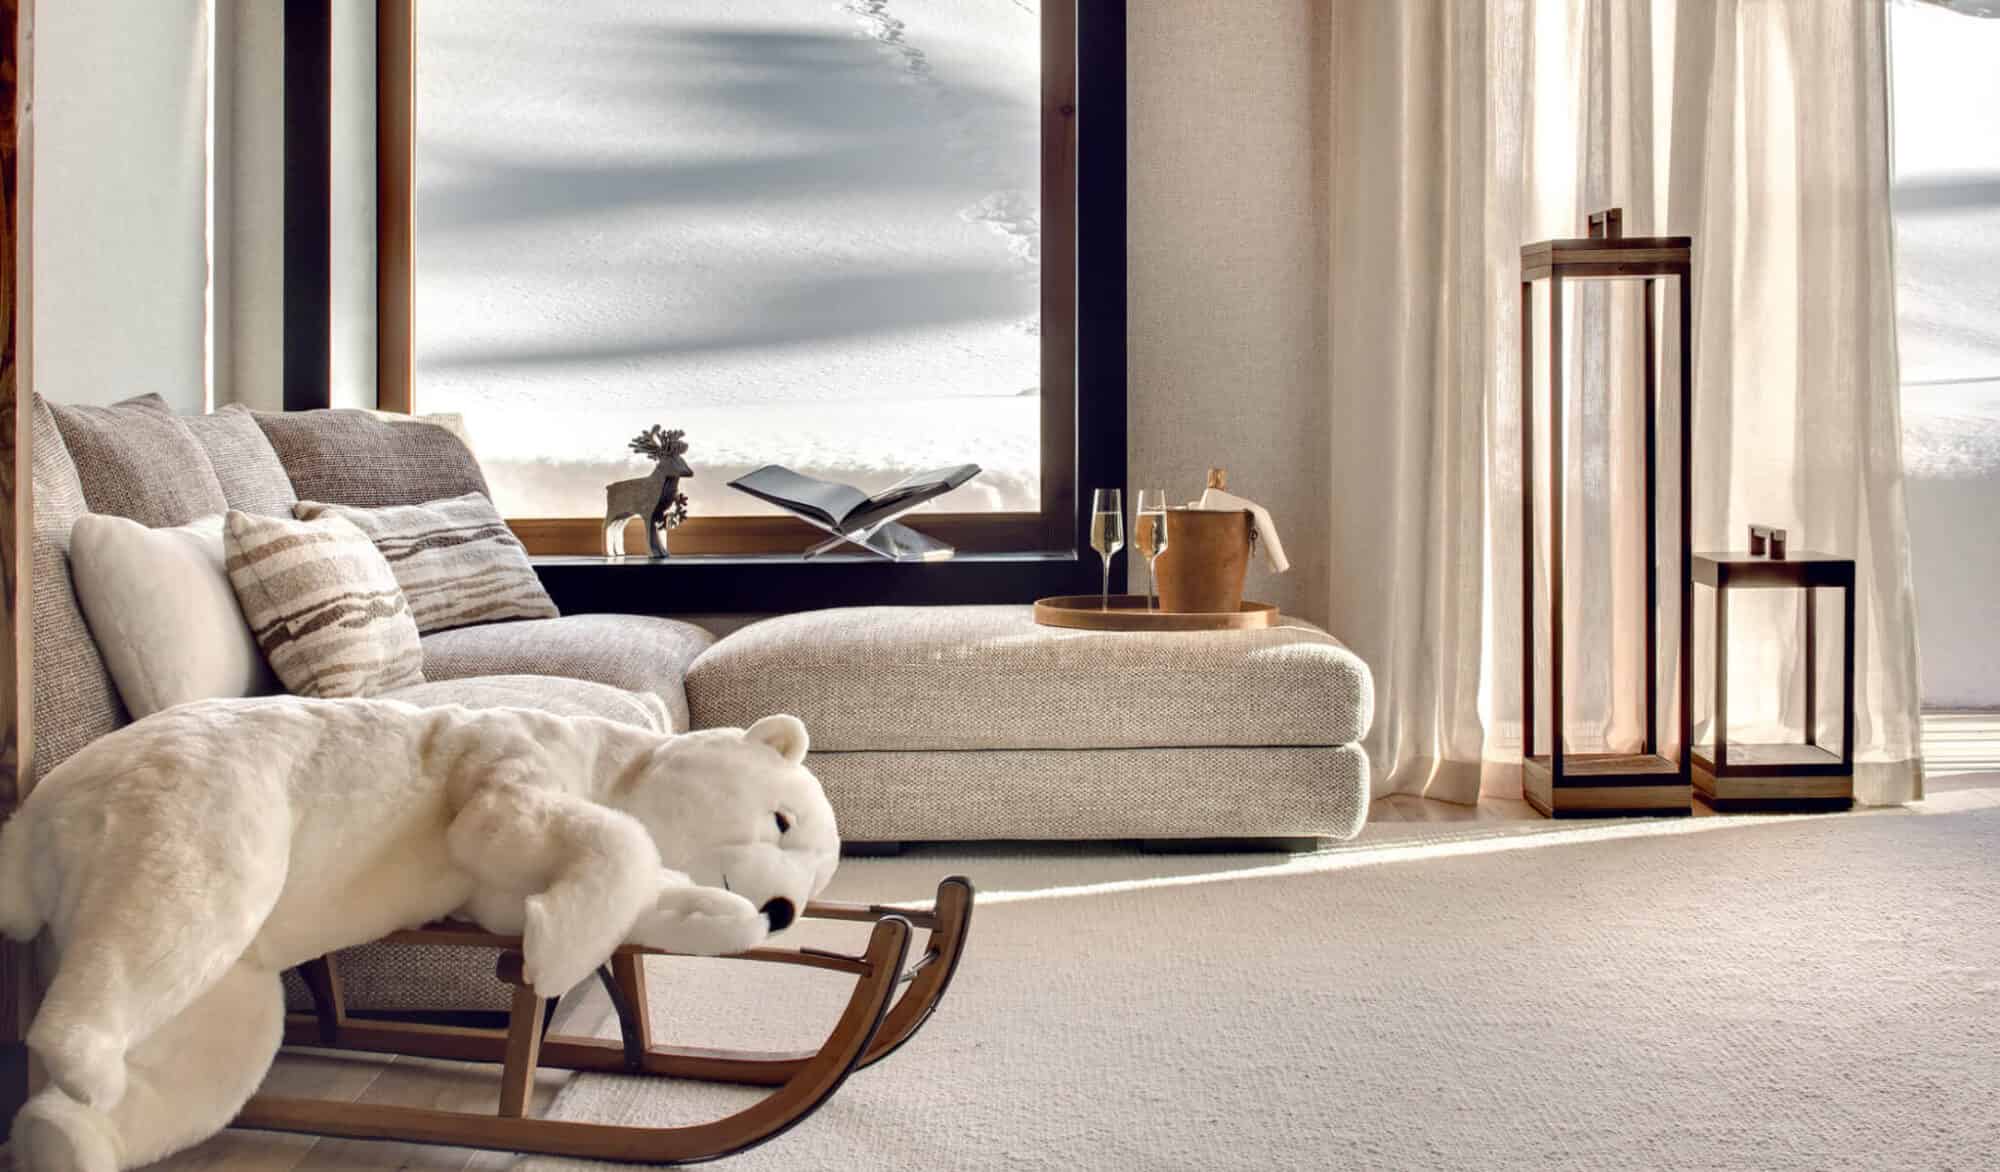 A living room at Antarès resort, with a beige couch, a large polar bear stuffed toy, and two glasses of champagne all situated next to a large window looking onto the snowy slopes.